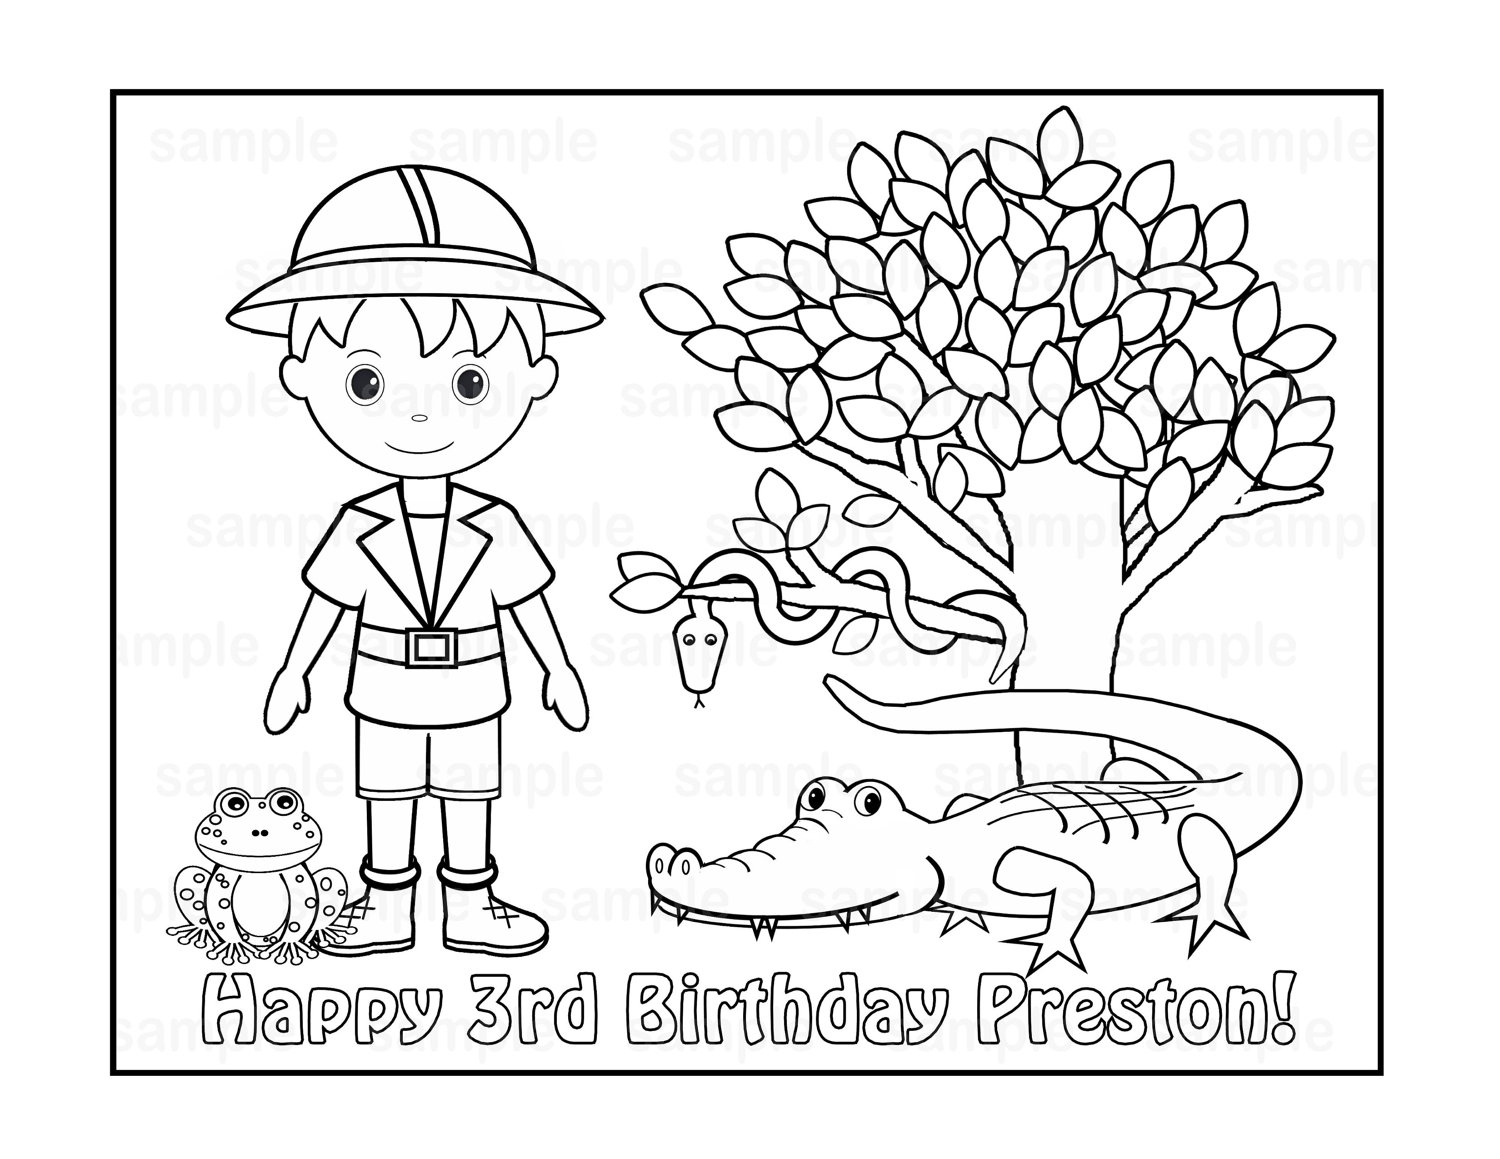 Personalized Birthday Coloring Pages At GetColorings Free Printable Colorings Pages To 